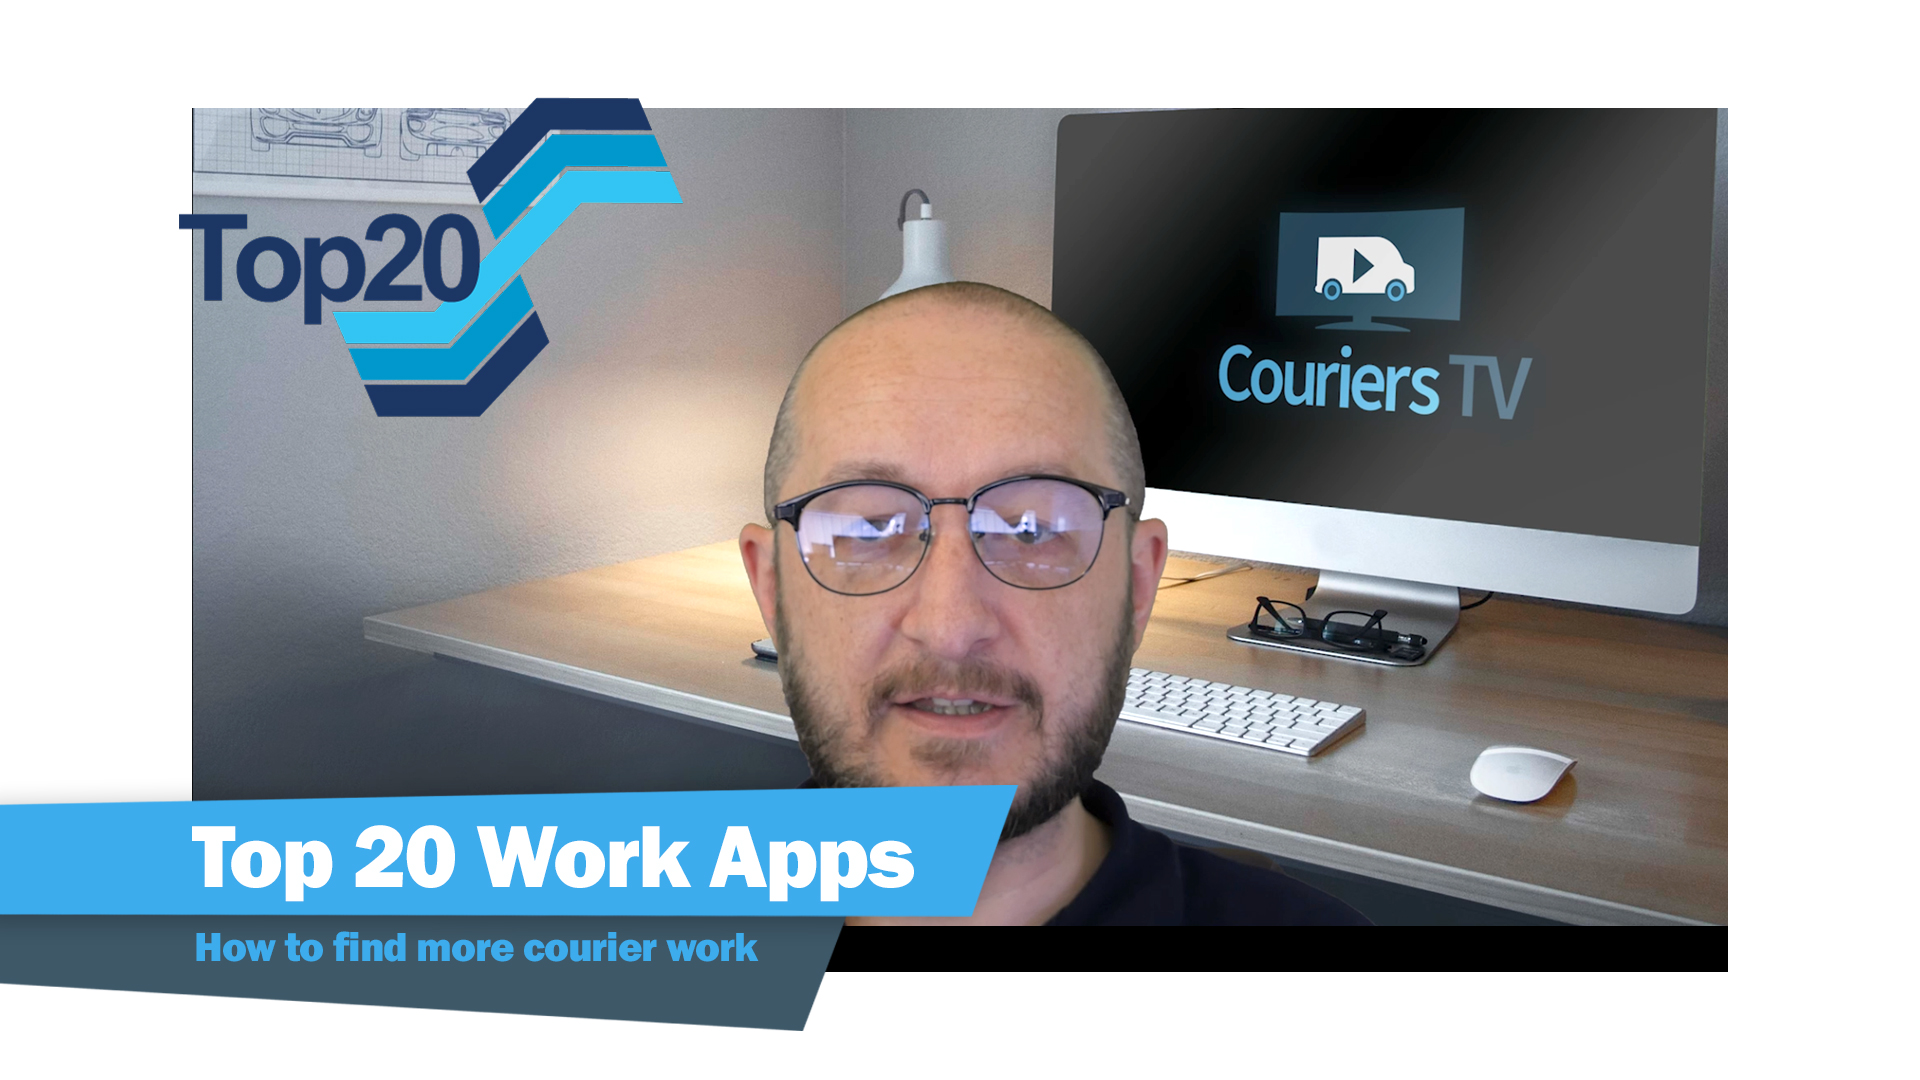 Top 20 Work Apps - Where to find more courier work